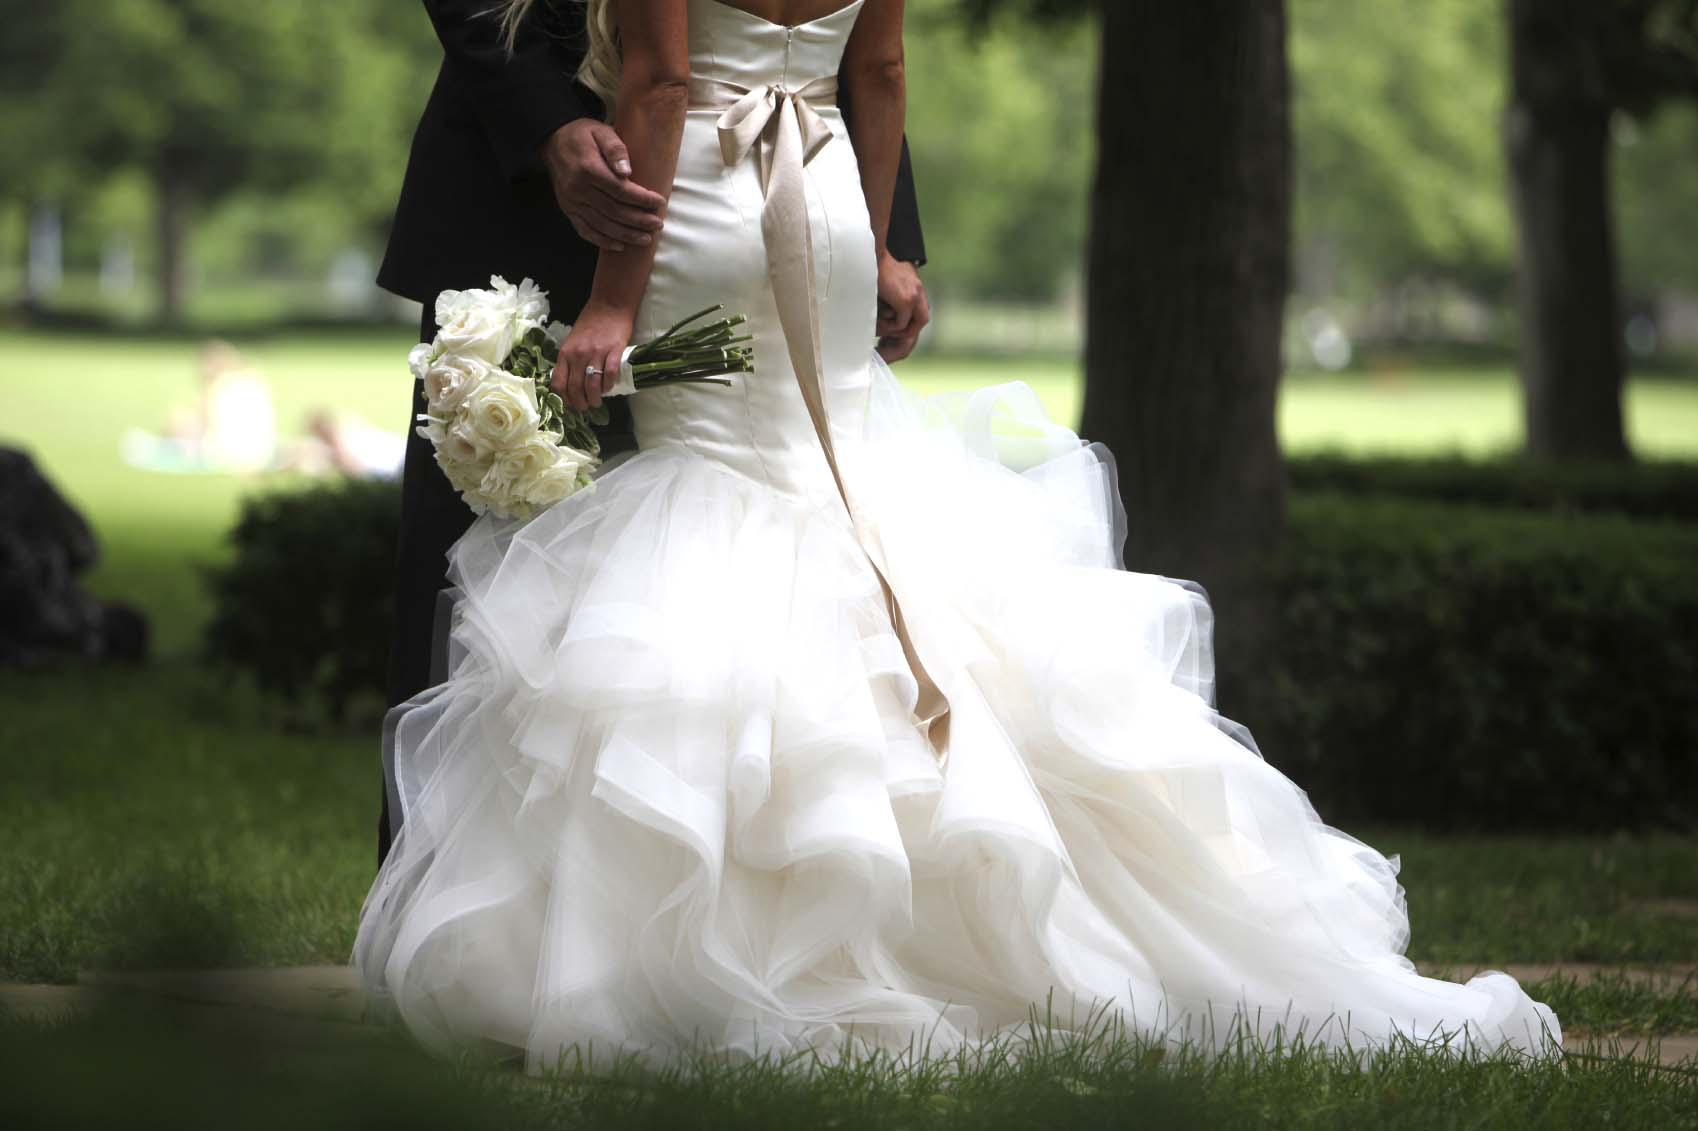 wearing a preloved wedding gown on your wedding day